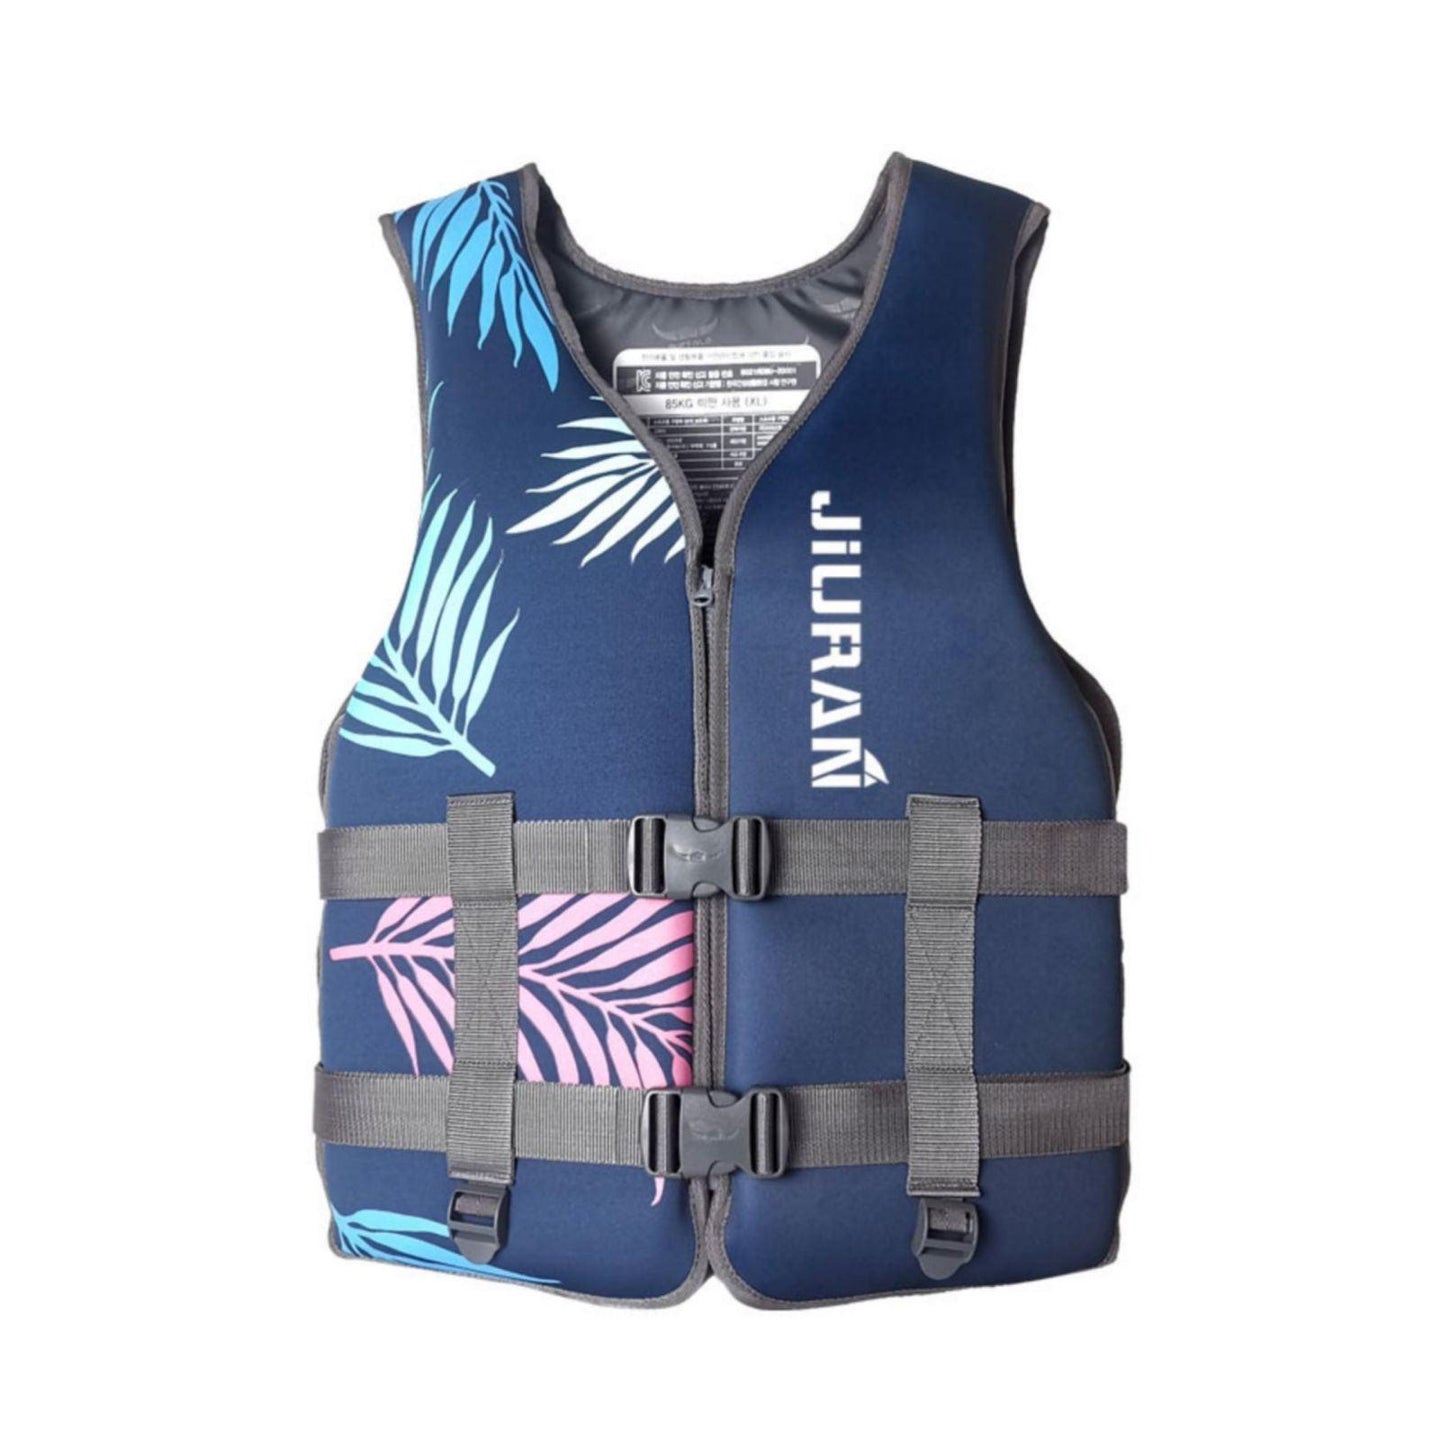 Buy Life Jacket for Unisex Adjustable Safety Breathable Life Vest for Men Women(Blue-L) discounted | Products On Sale Australia